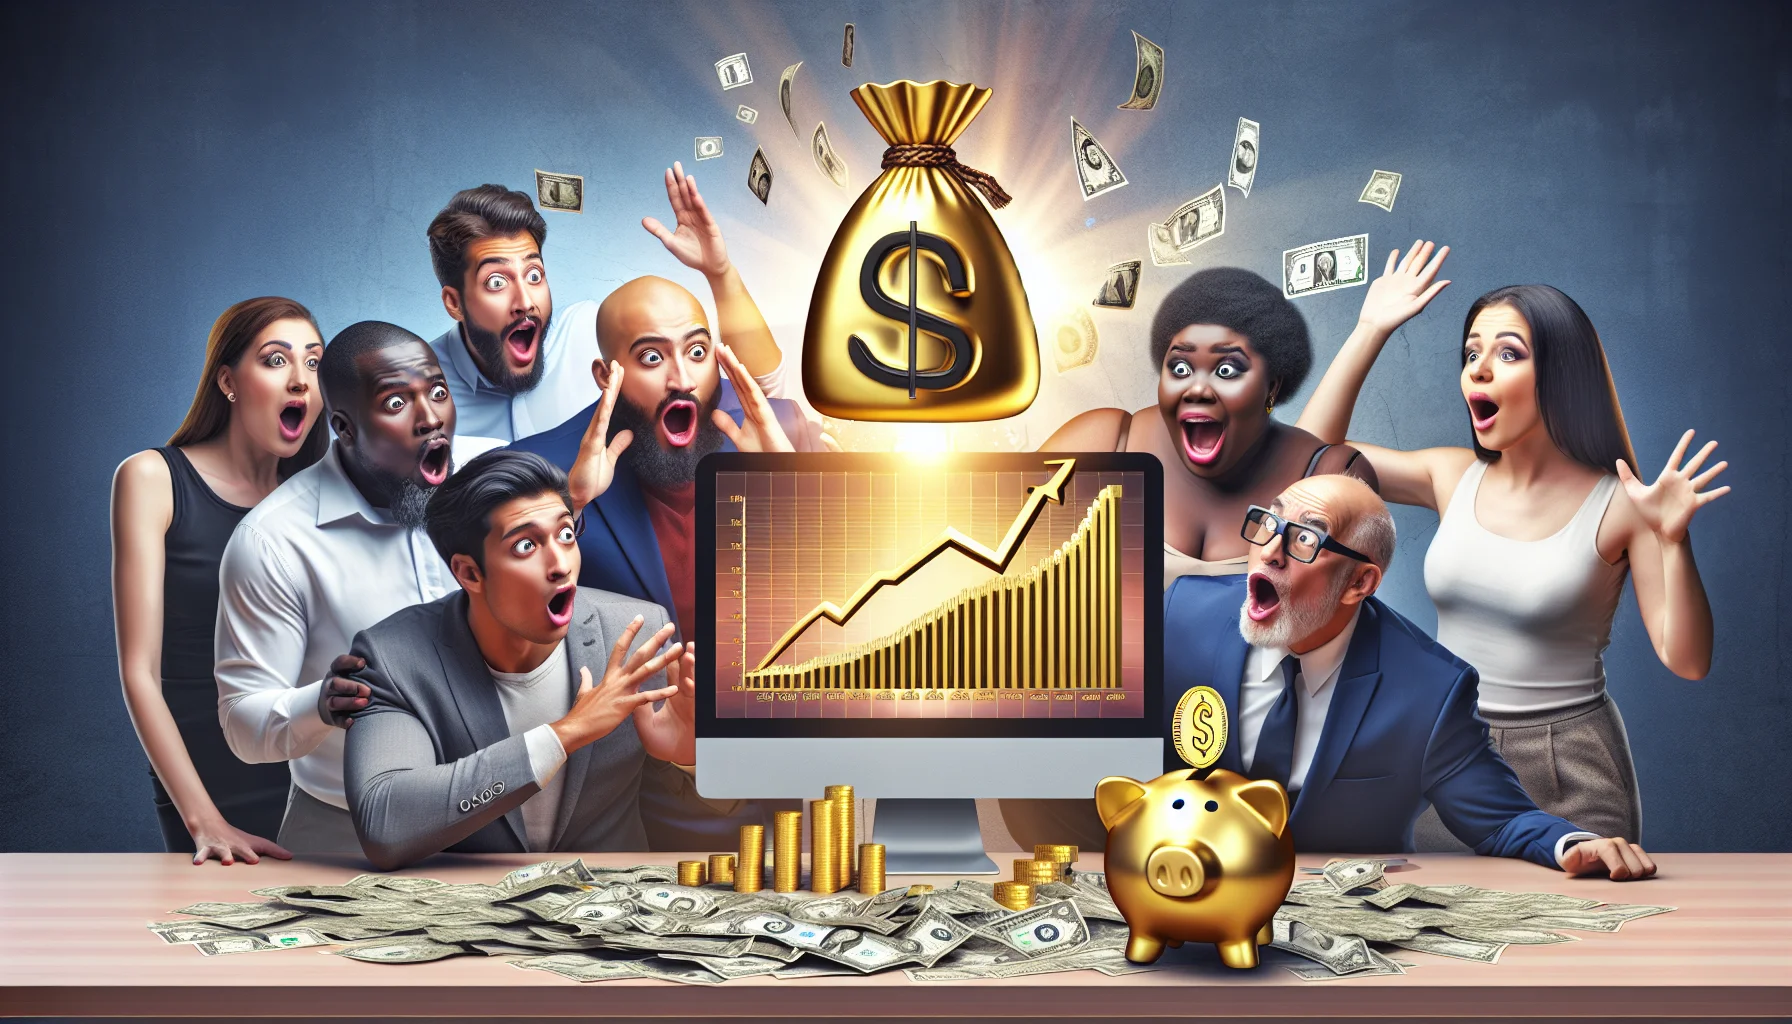 A humorous and realistic image featuring the concept of an affiliate program named 'Jasper', represented as a golden logo. In the background, potential online earnings are symbolized by a computer screen displaying a rising graph of profit with dollar signs. Nearby, a crowd of diverse people— a Middle-Eastern man, a Hispanic woman, a Black woman, a South Asian man, and a Caucasian man, all of varying ages—watch in astonishment and joy. Their expressions reflect surprise and excitement about the potential earnings from the program. To heighten the humor, a small piggy bank stands on the table, gobbling dollar bills from a pile next to it, suggesting the high potential for savings.